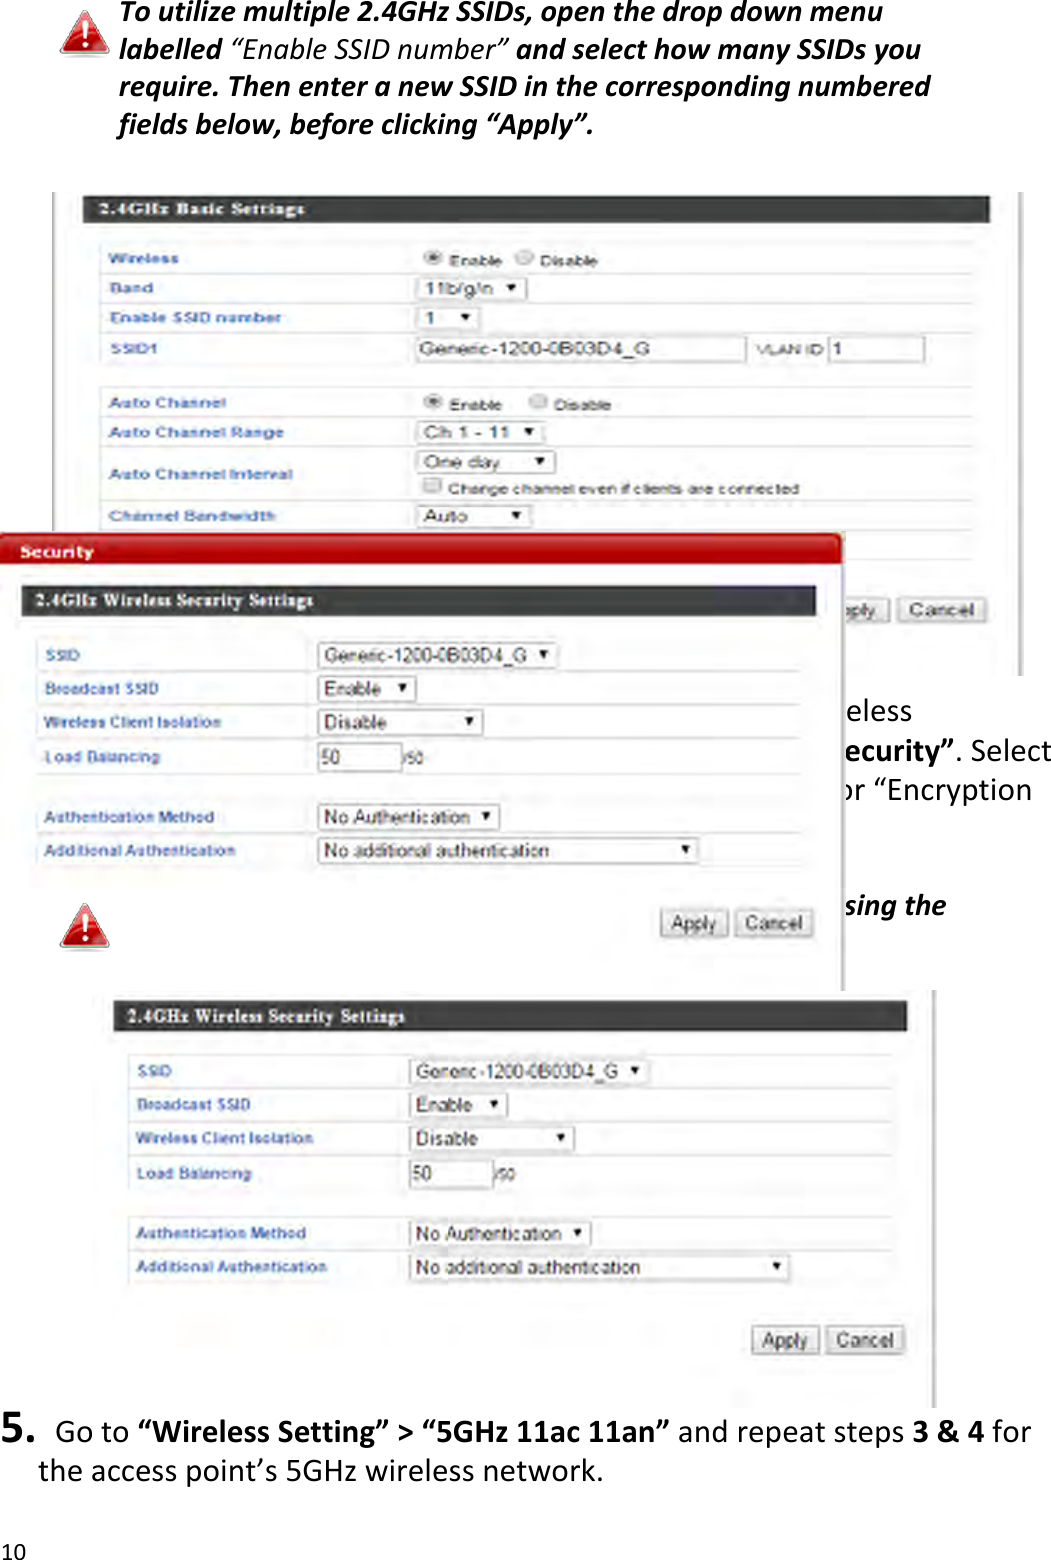 10  To utilize multiple 2.4GHz SSIDs, open the drop down menu labelled “Enable SSID number” and select how many SSIDs you require. Then enter a new SSID in the corresponding numbered fields below, before clicking “Apply”.    4.  To configure the security of your access point’s 2.4GHz wireless network(s), go to “Wireless Setting” &gt; “2.4GHz 11bgn” &gt; “Security”. Select an “Authentication Method” and enter a “Pre-shared Key” or “Encryption Key” depending on your choice, then click “Apply”.  If using multiple SSIDs, specify which SSID to configure using the “SSID” drop down menu.           5.   Go to “Wireless Setting” &gt; “5GHz 11ac 11an” and repeat steps 3 &amp; 4 for the access point’s 5GHz wireless network.  